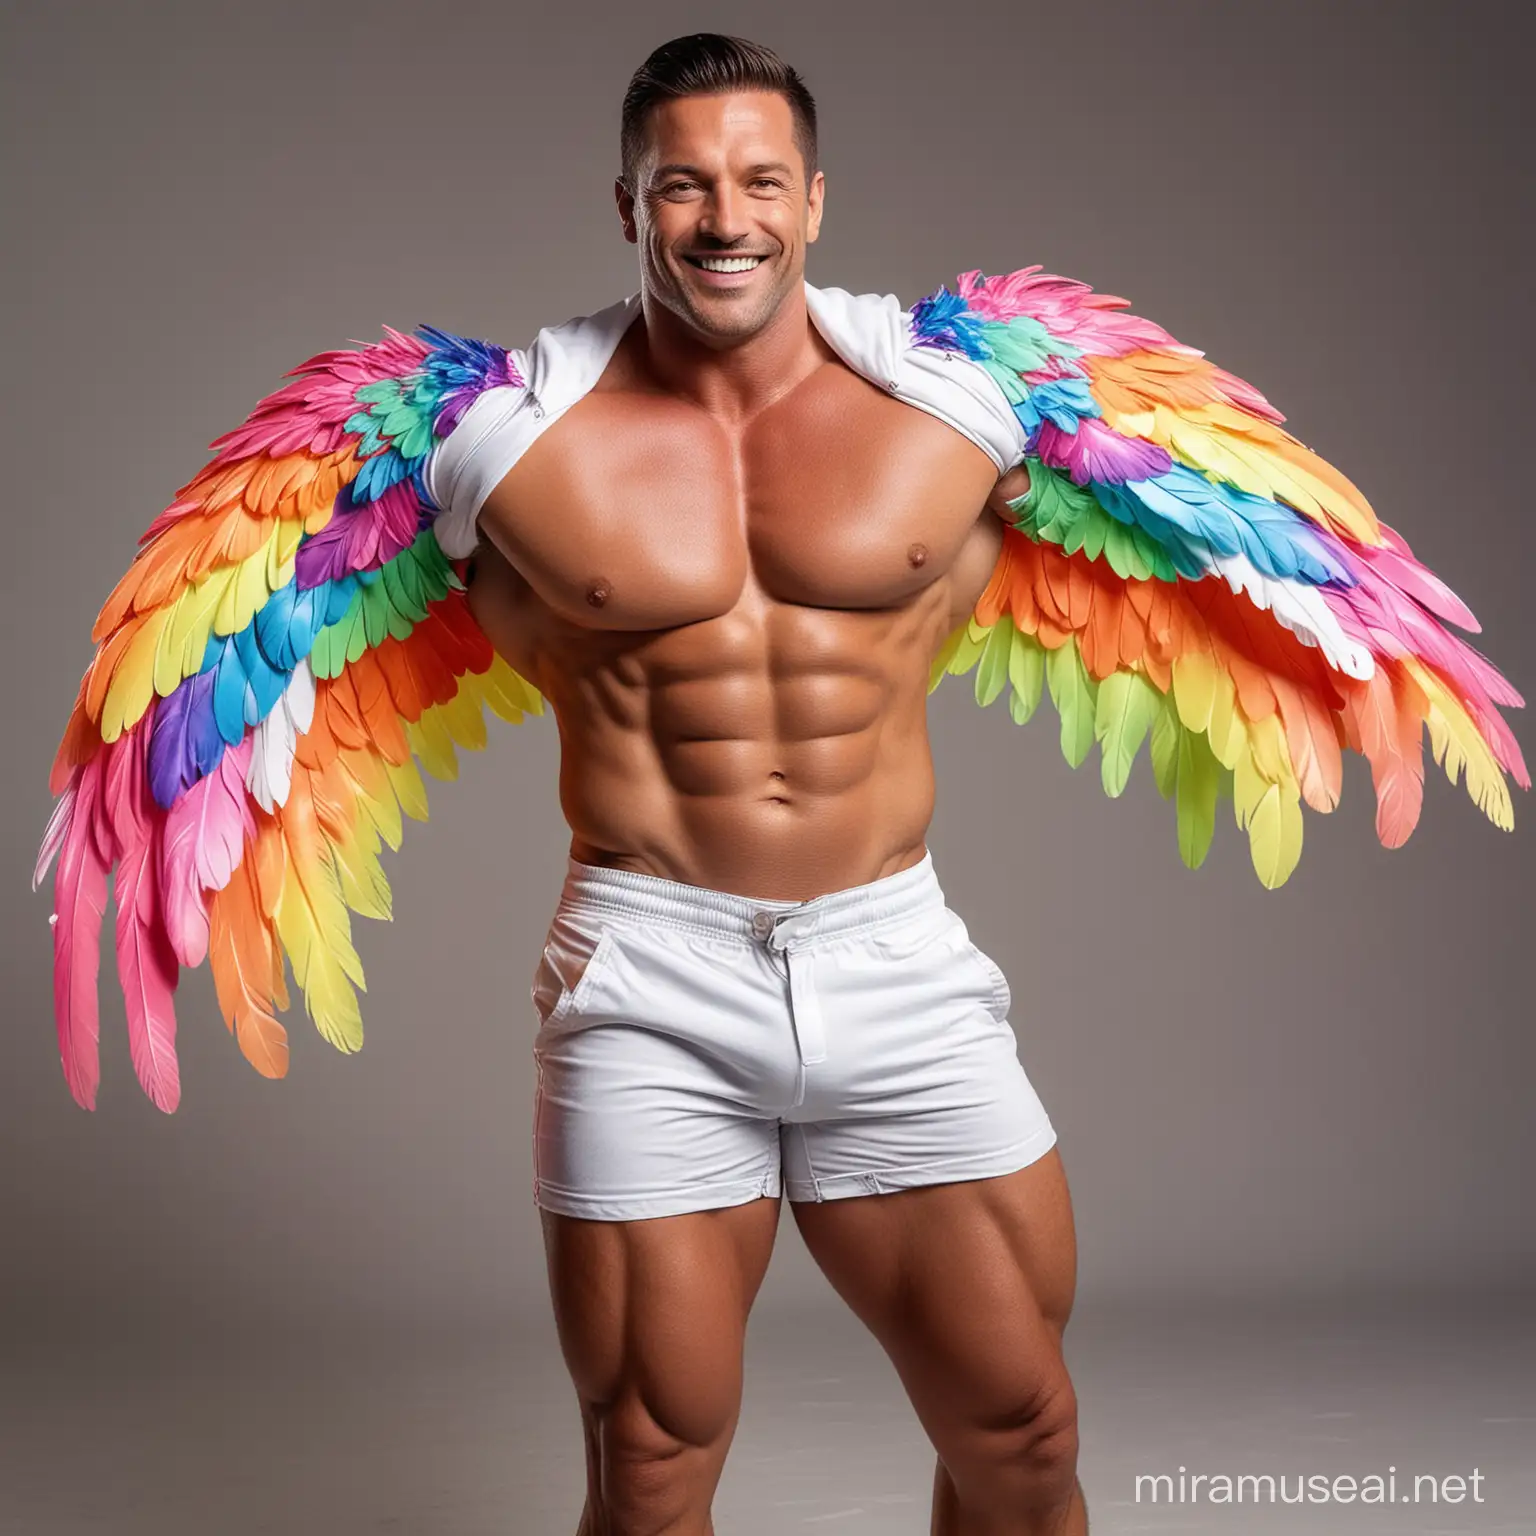 Ultra Chunky IFBB Bodybuilder Daddy Flexing in Rainbow Colored Jacket with Eagle Wings